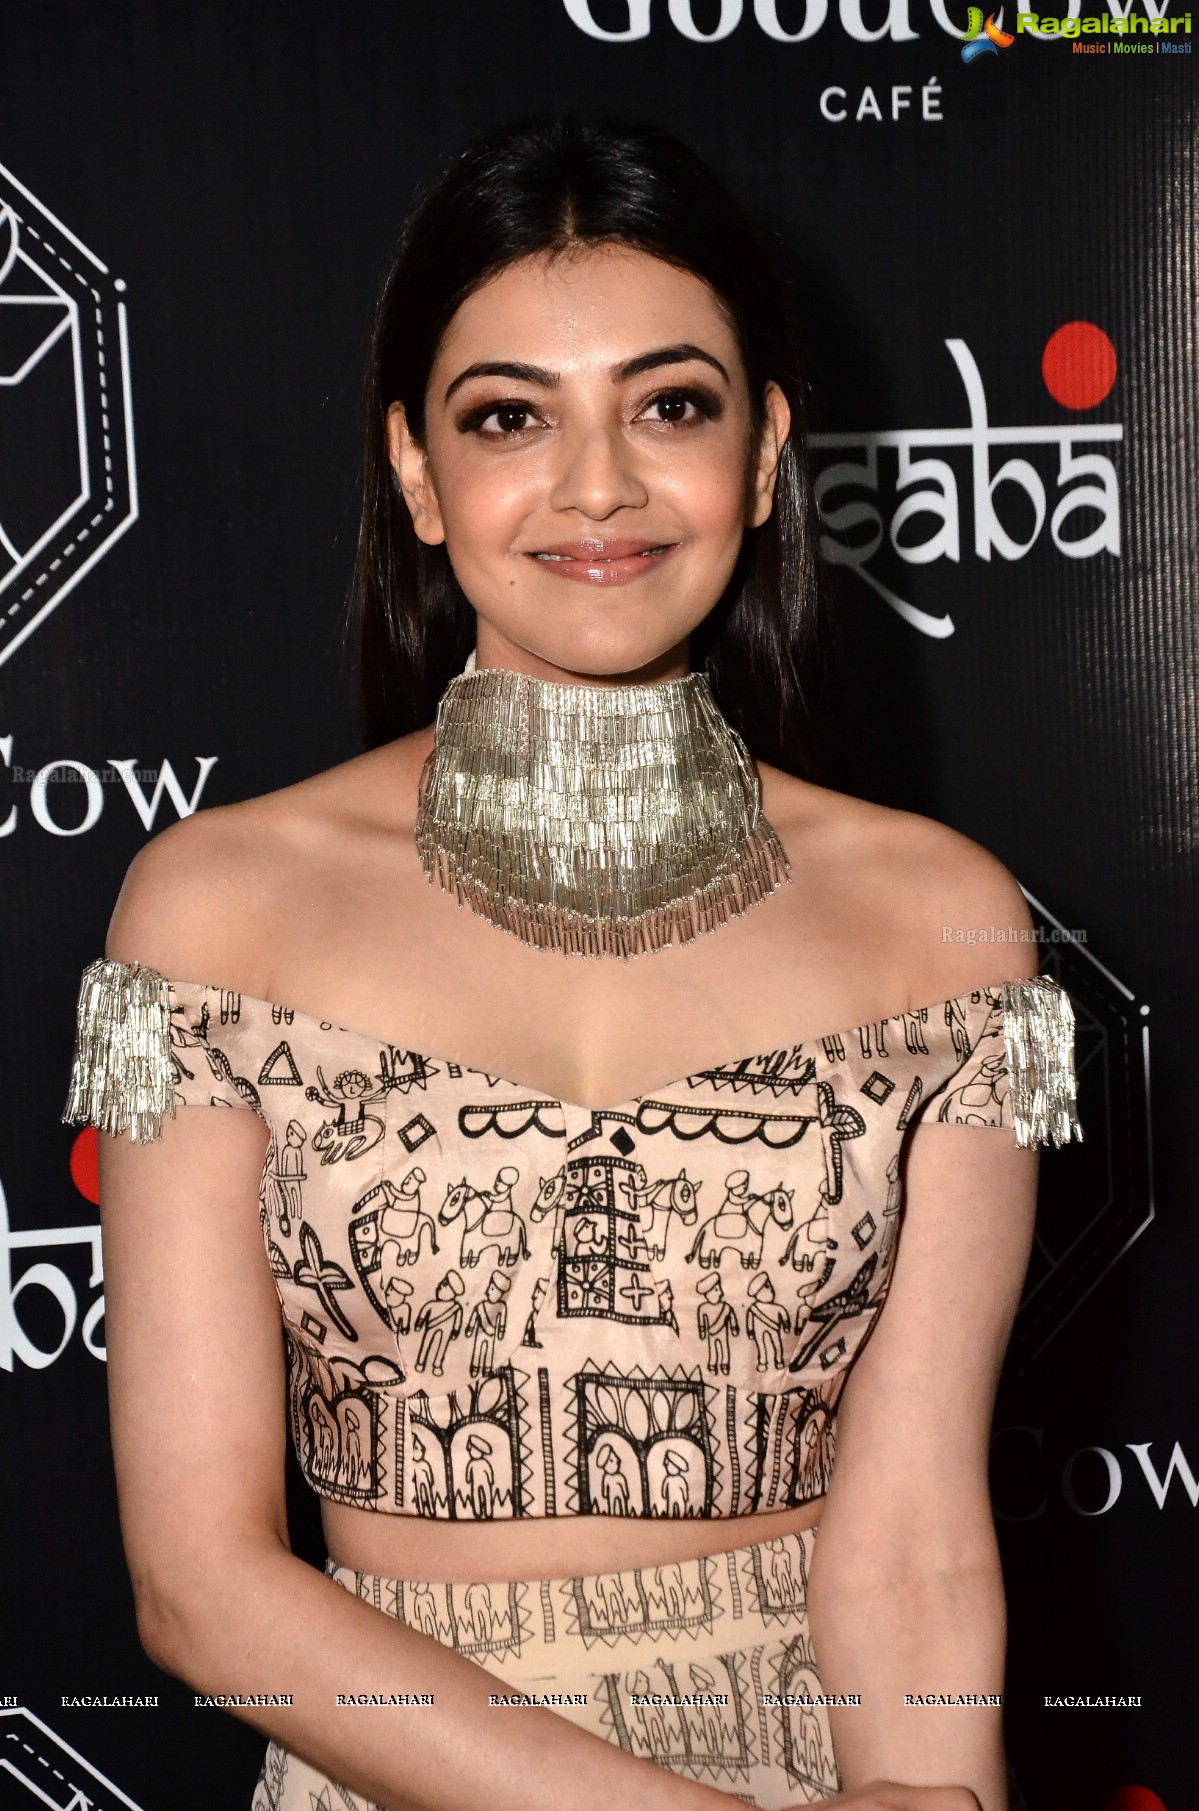 Kajal Aggarwal at Good Cow Cafe and Aquamarine Jewellery Launch, HD Gallery